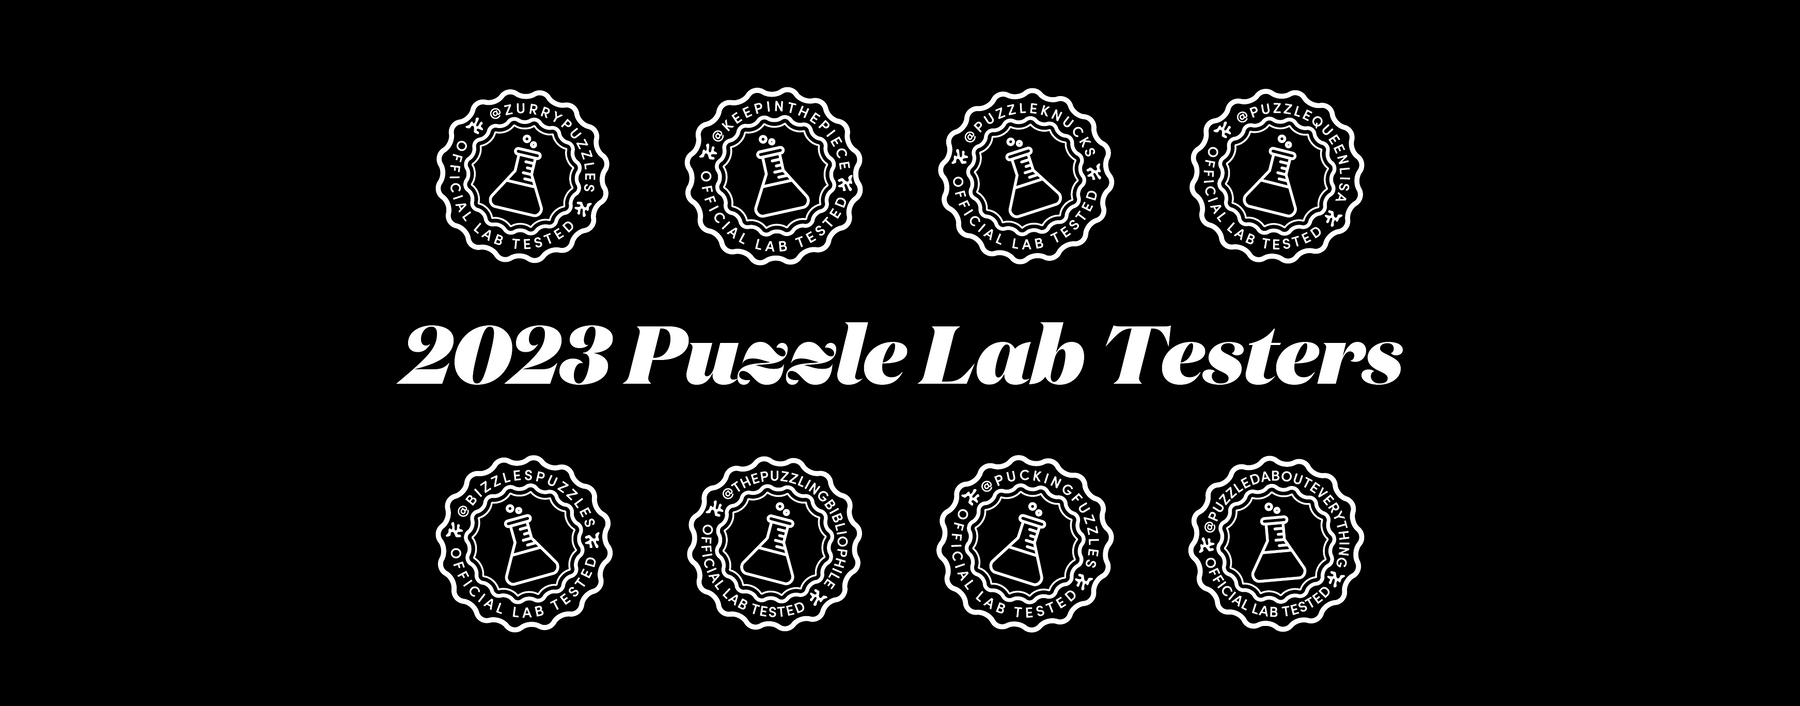 The Puzzle Lab Testers: Our Trusty Brand Ambassadors